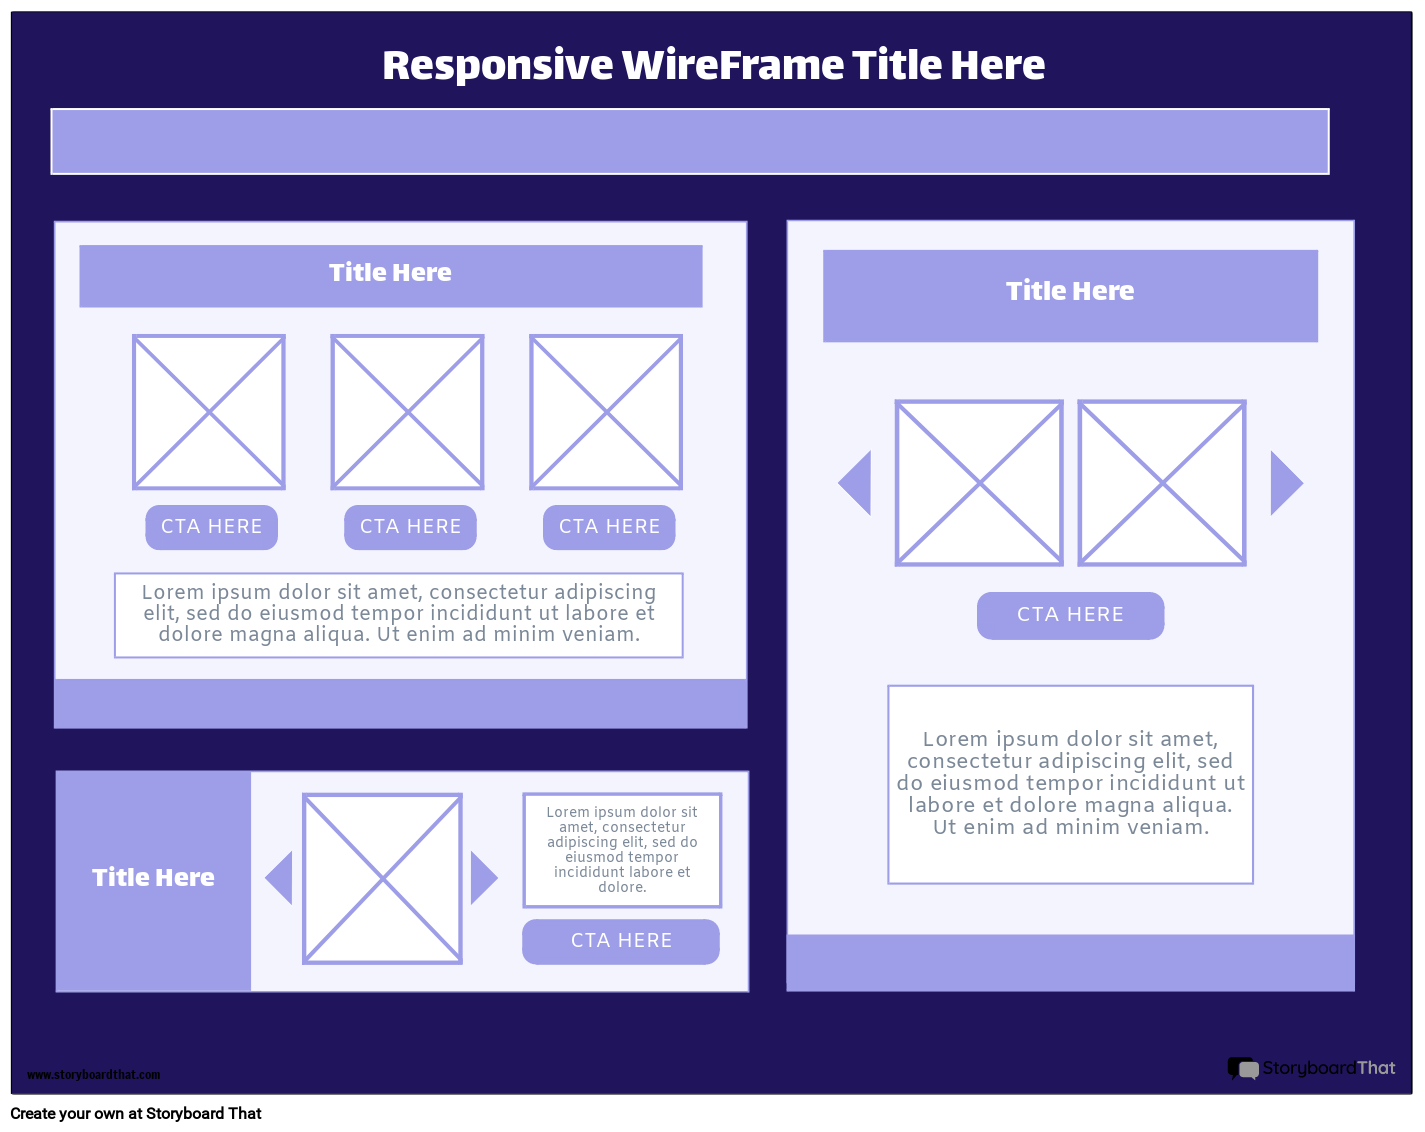 Corporate Responsive WireFrame Template 3